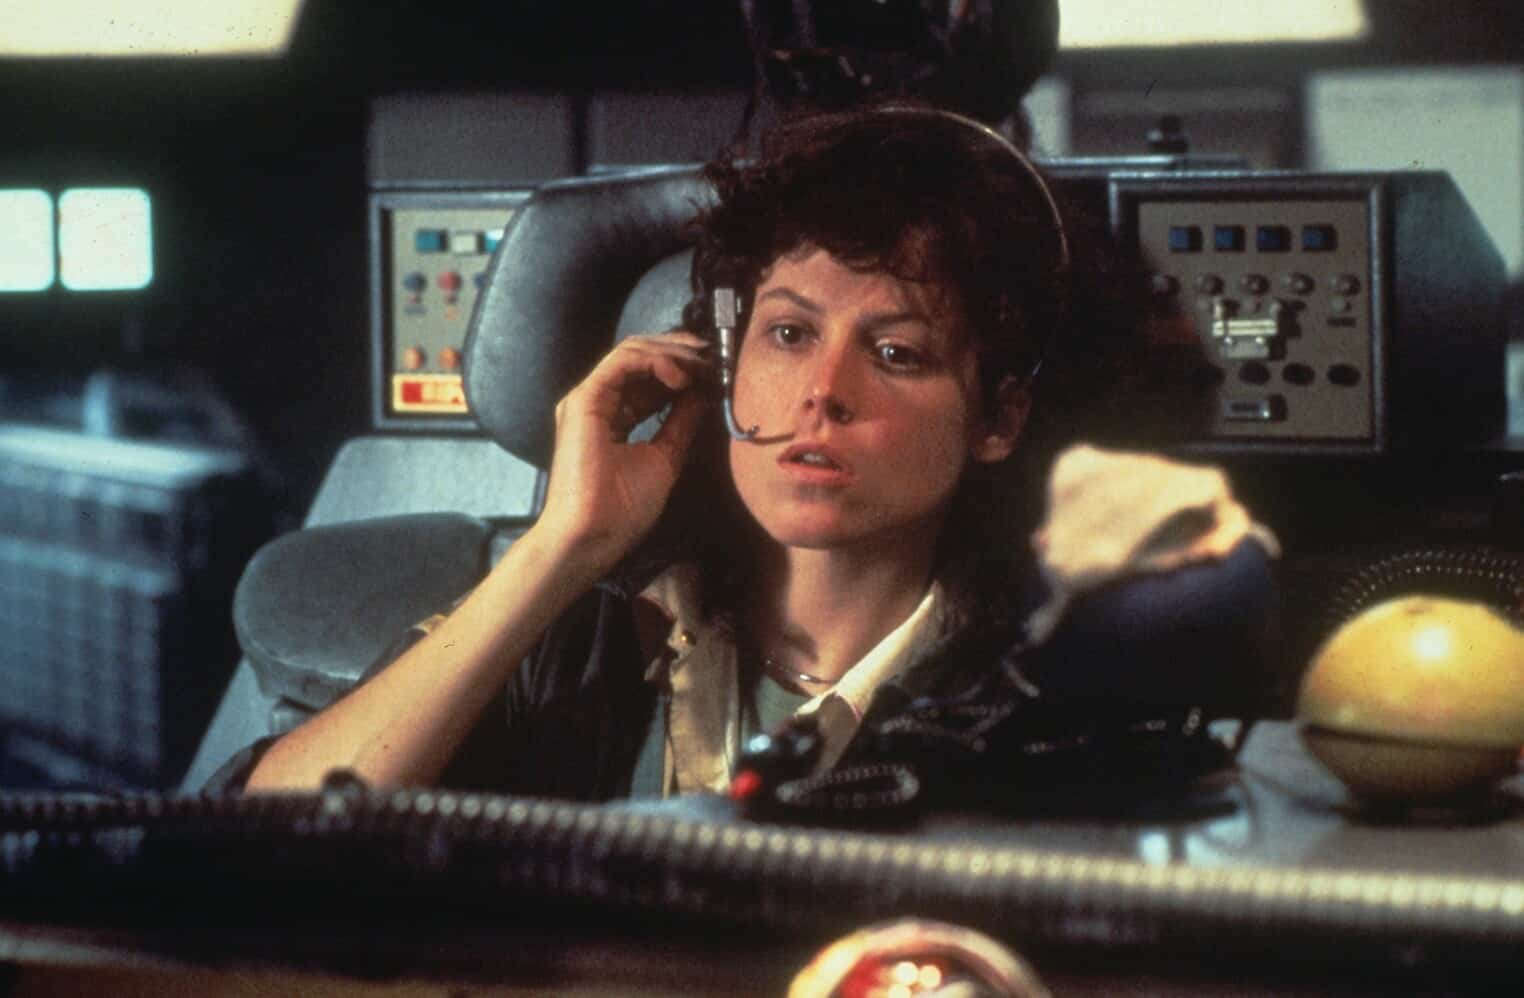 A woman operates radio control in this image from 20th Century Fox.